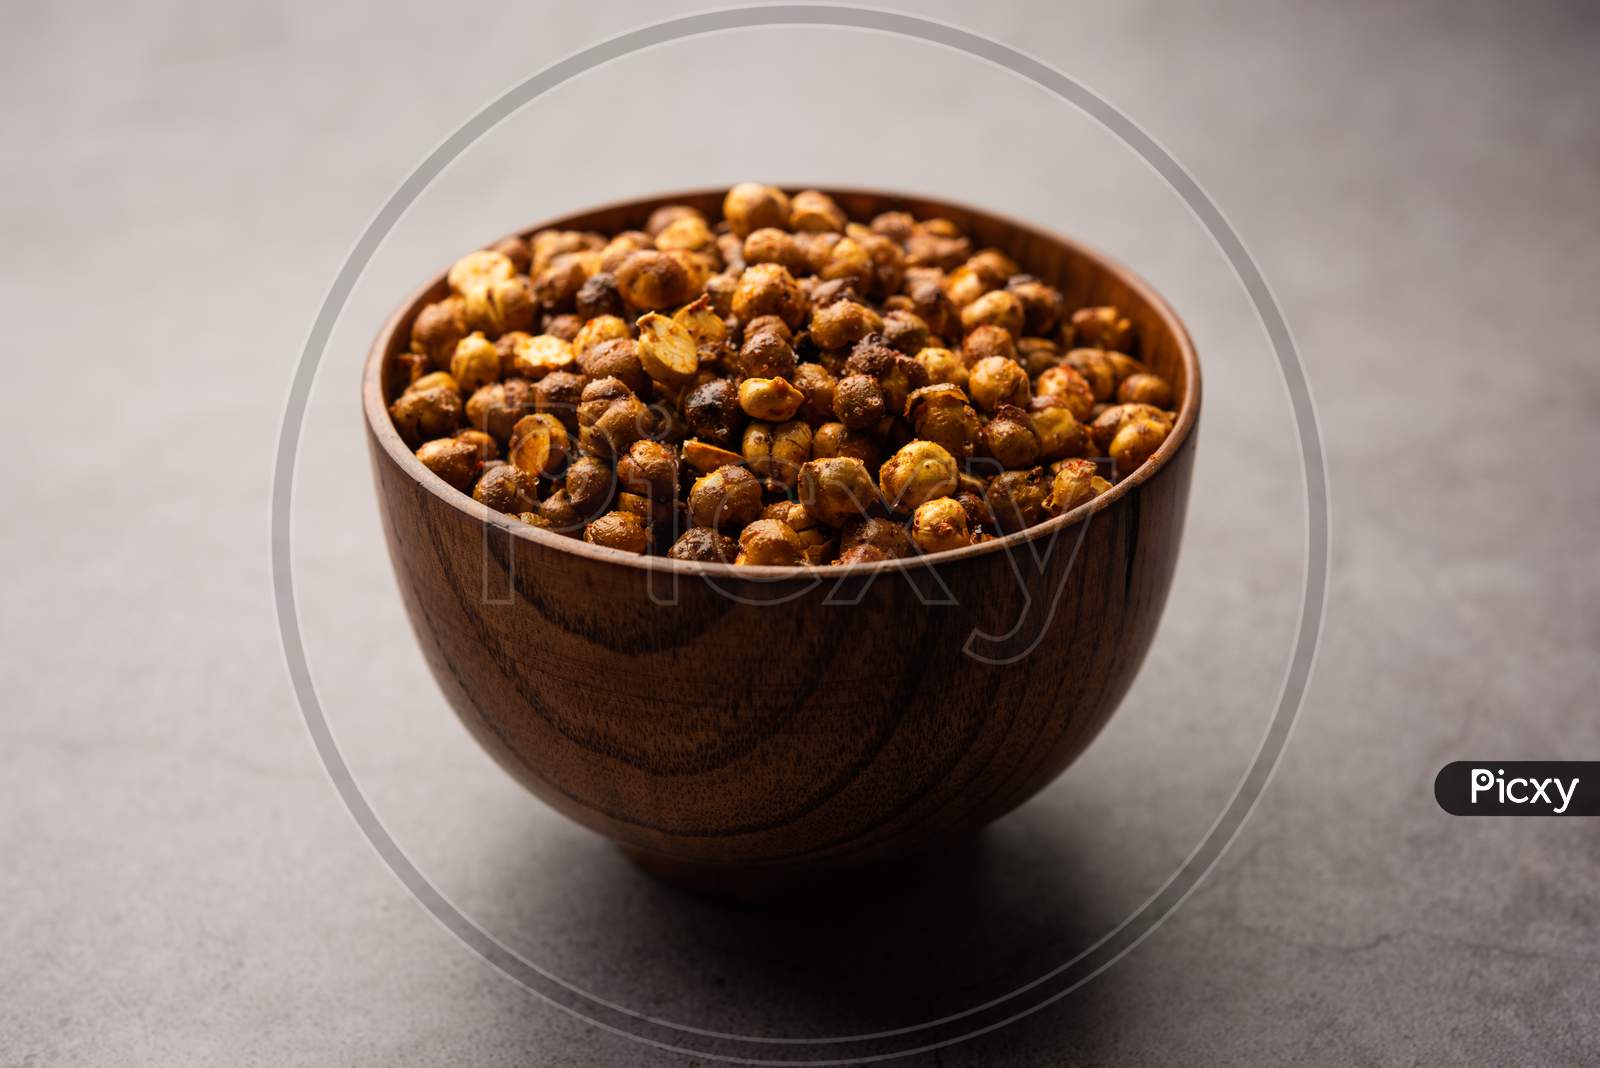 Fried Chickpeas Or Futana Or Chana Is A Spicy And Salty Crispy Snack From India